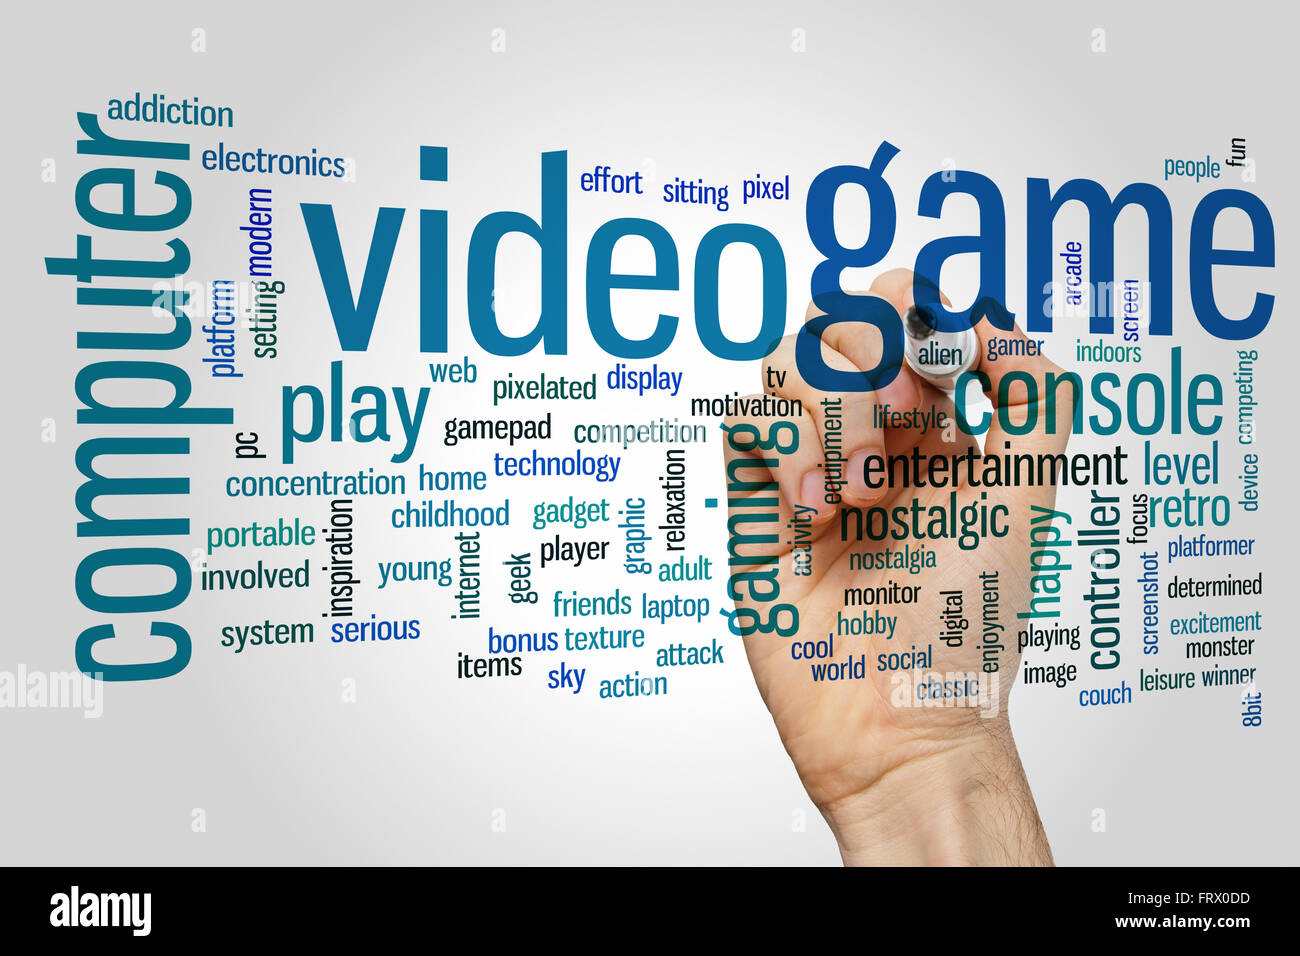 Video game concept word cloud background Stock Photo